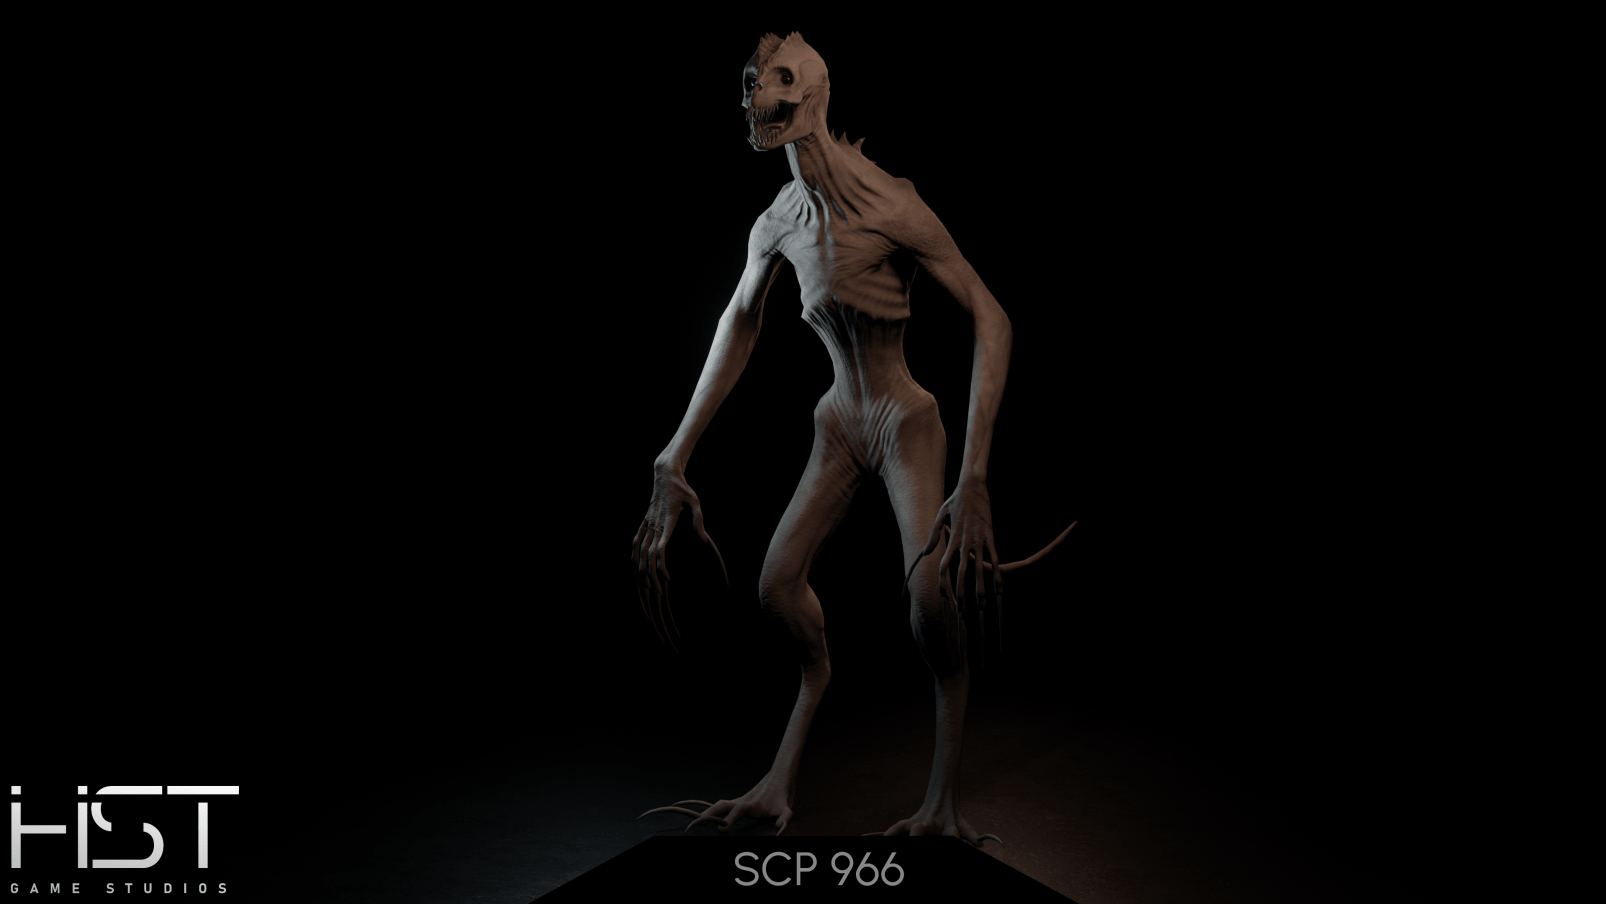 SCP: Fragmented Minds - SCP-939 : r/SCP